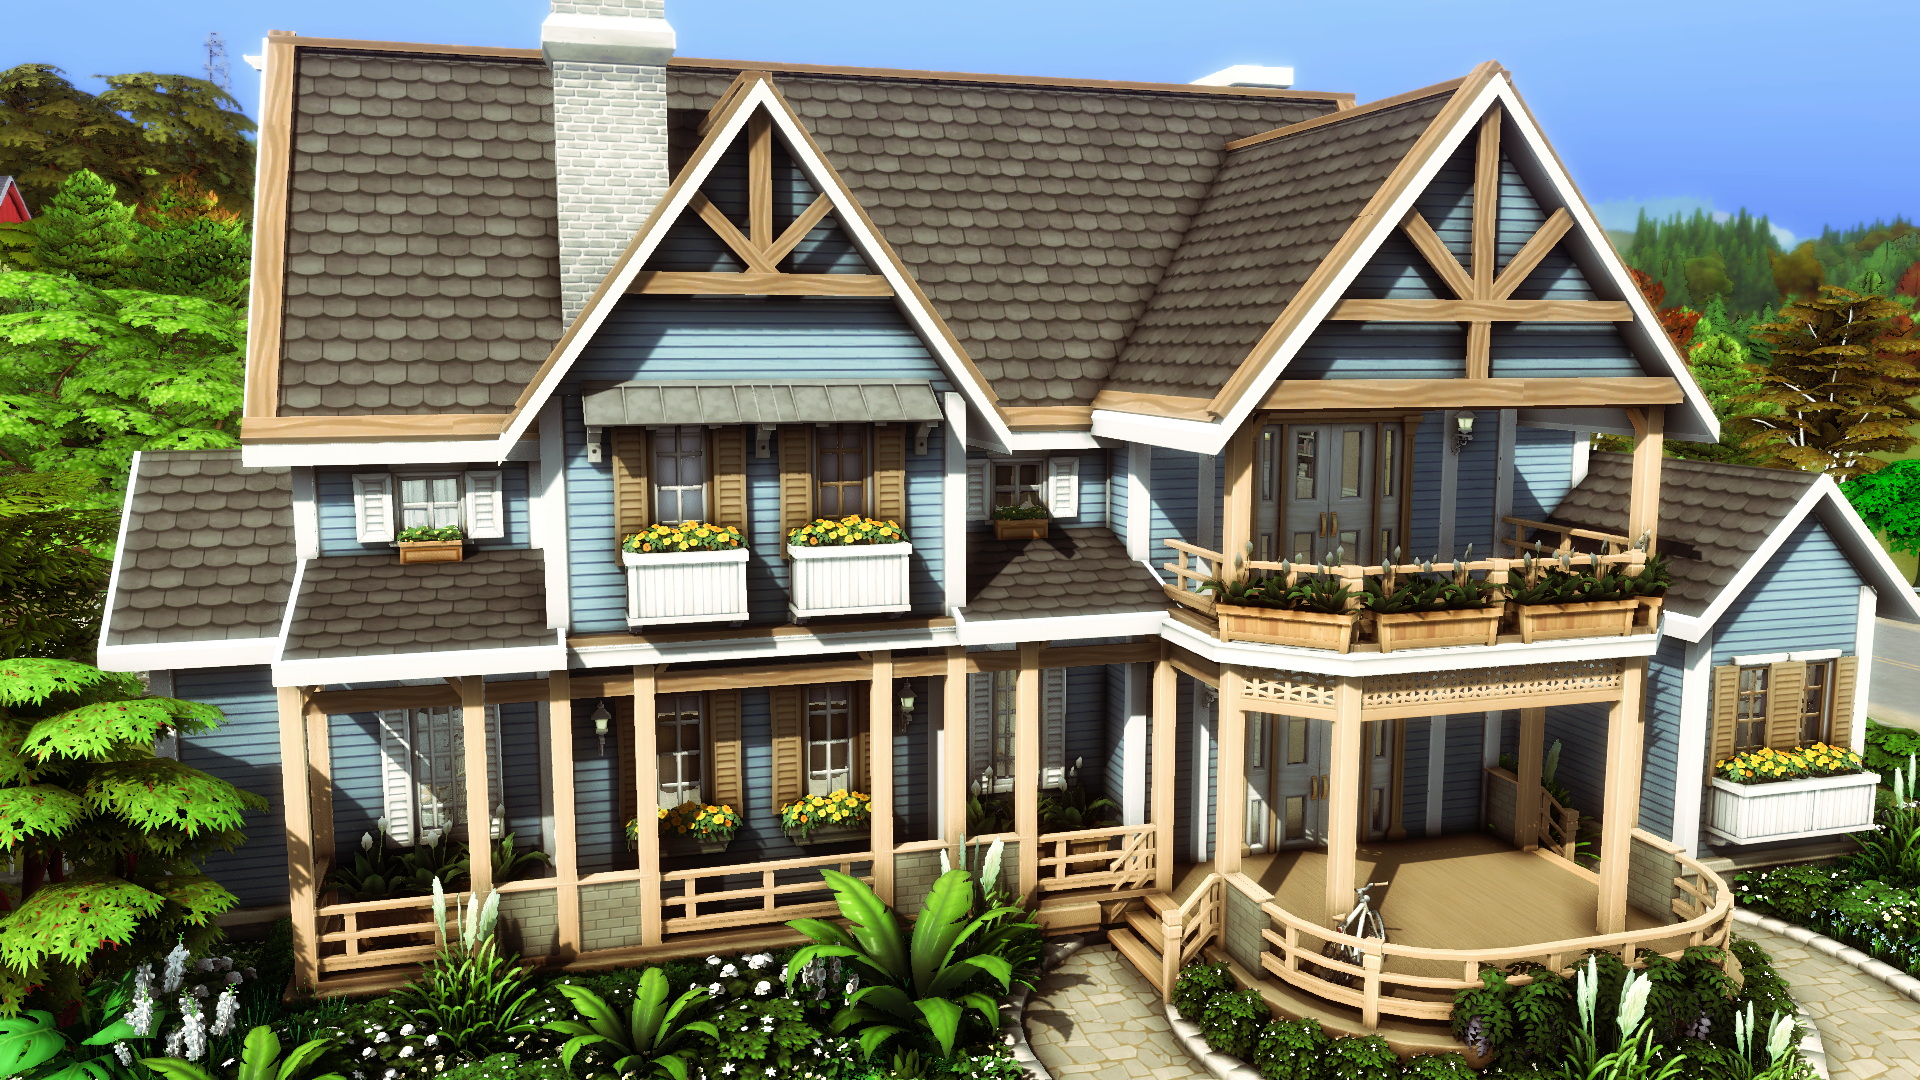 Familiar Country House By Plumbobkingdom At Mod The Sims 4 Sims 4 Updates